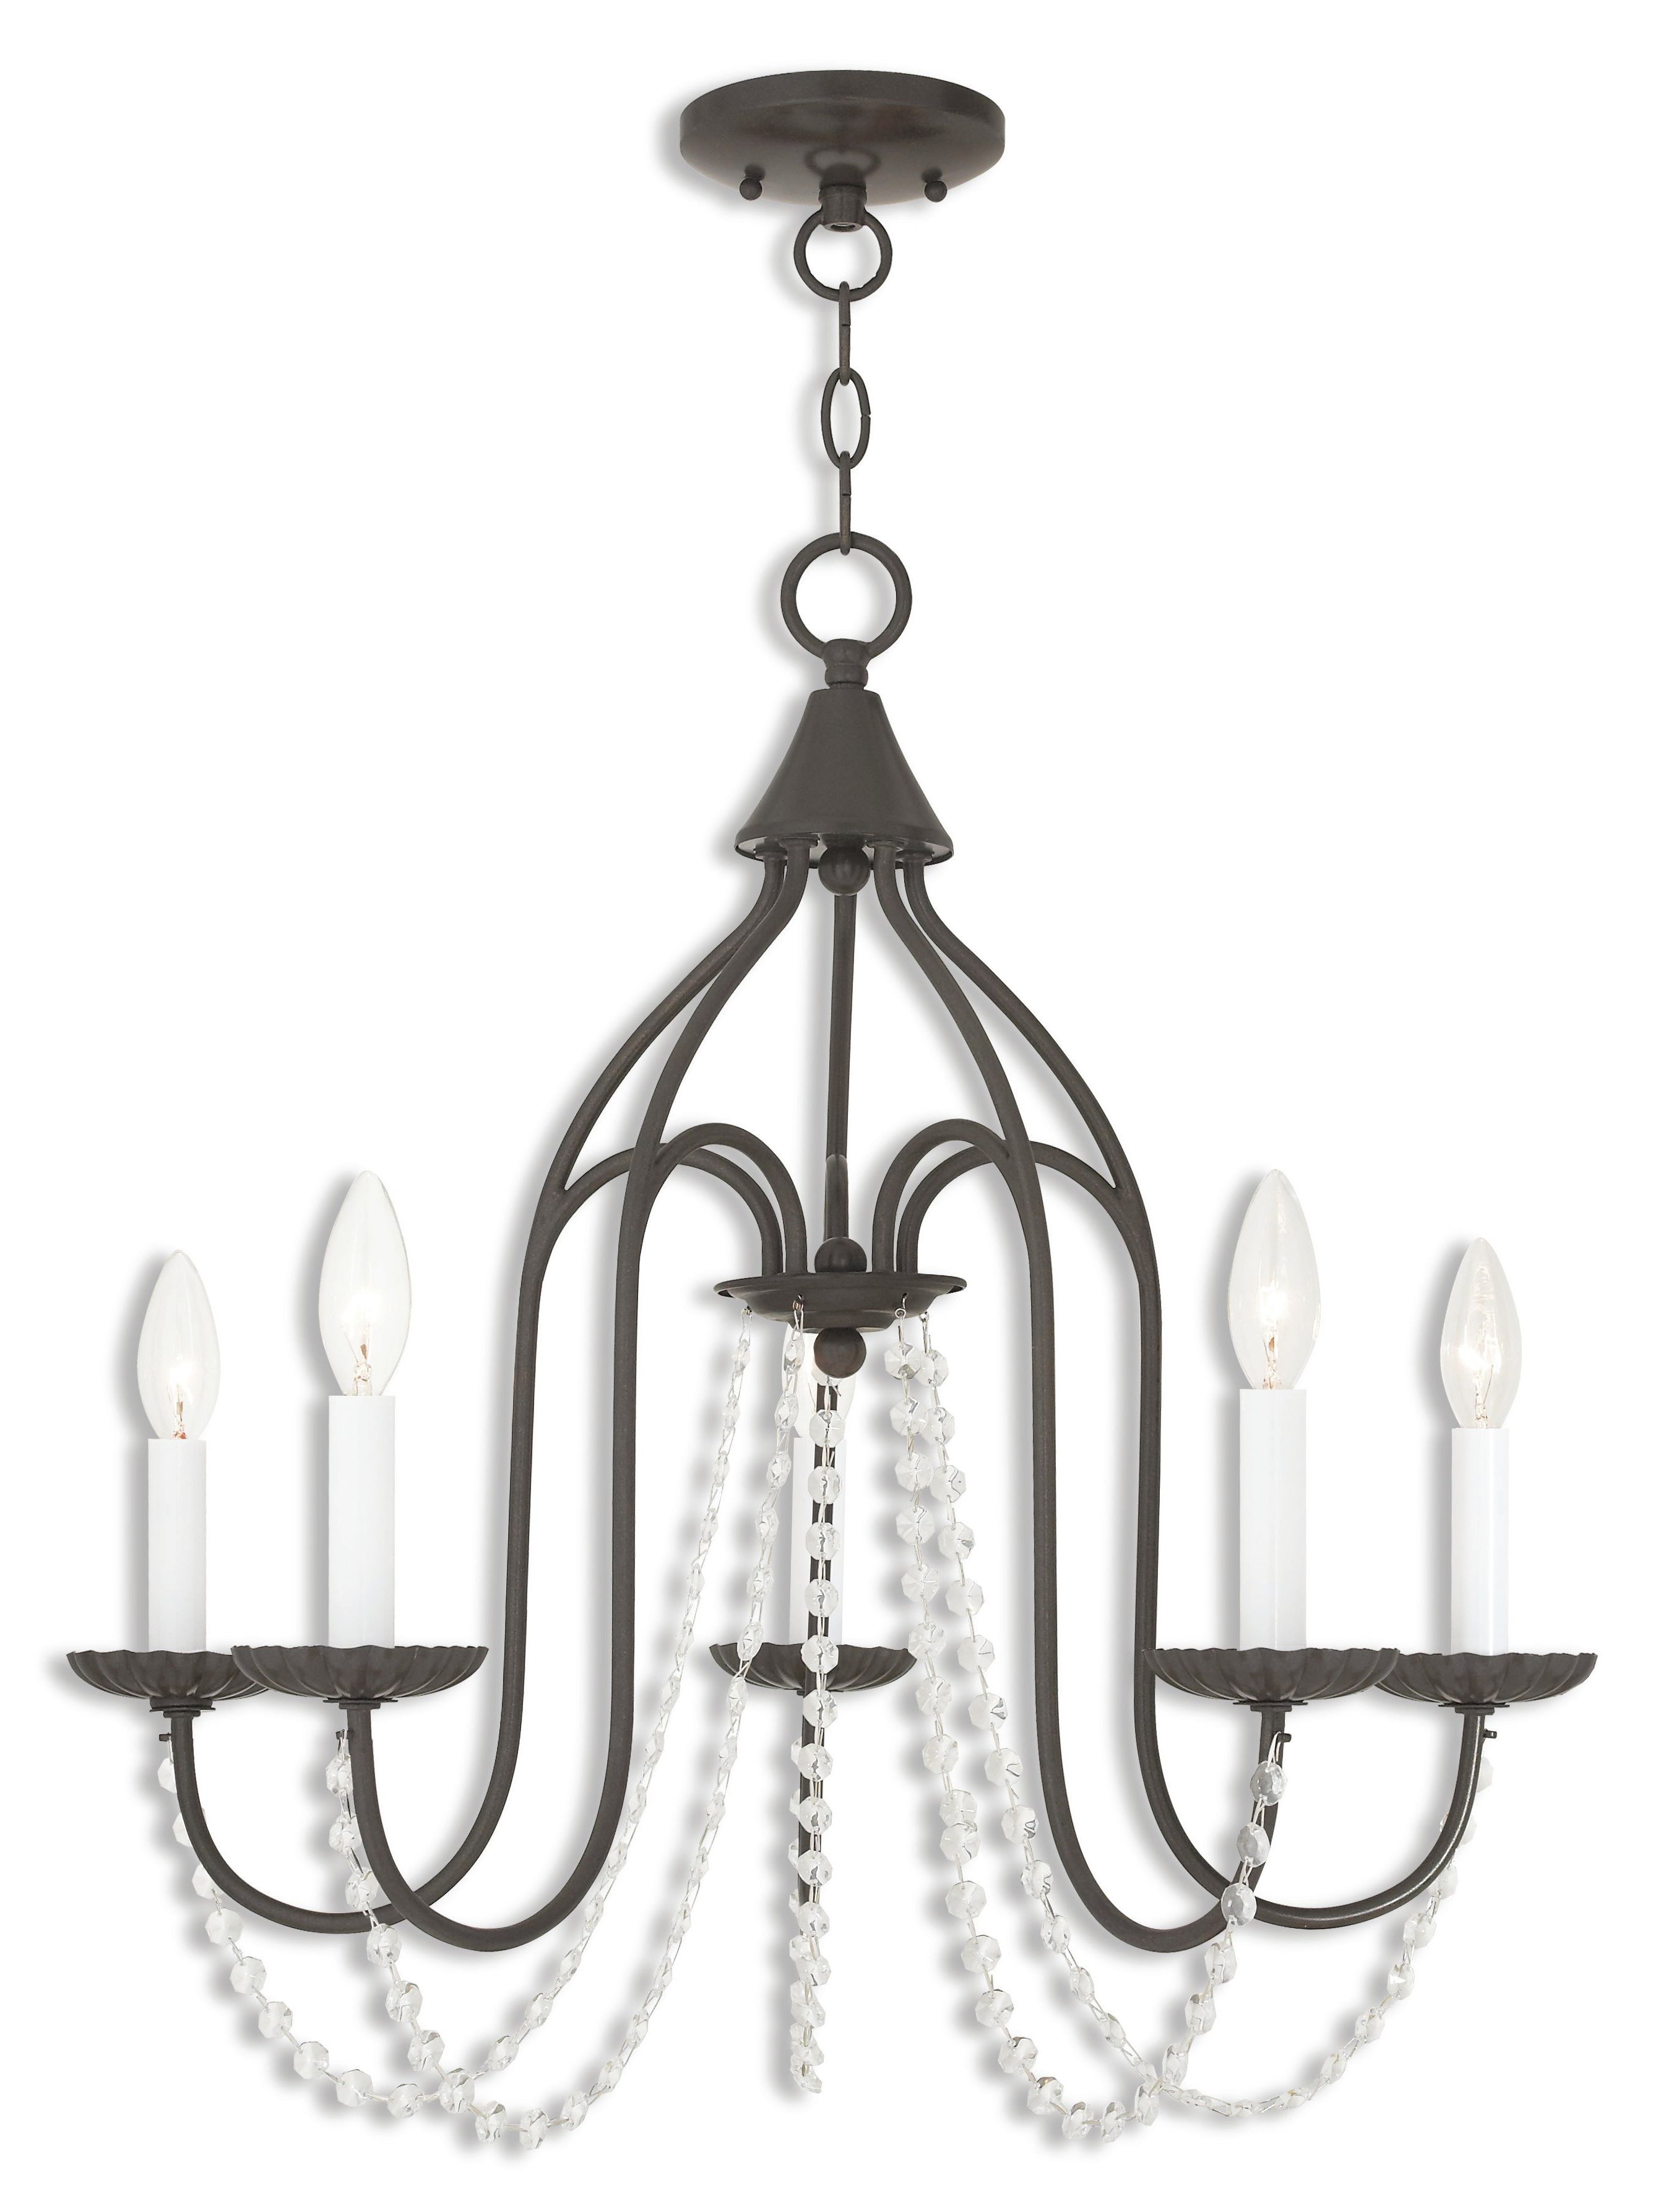 Preferred Florentina 5 Light Candle Style Chandelier Within Shaylee 5 Light Candle Style Chandeliers (View 8 of 20)